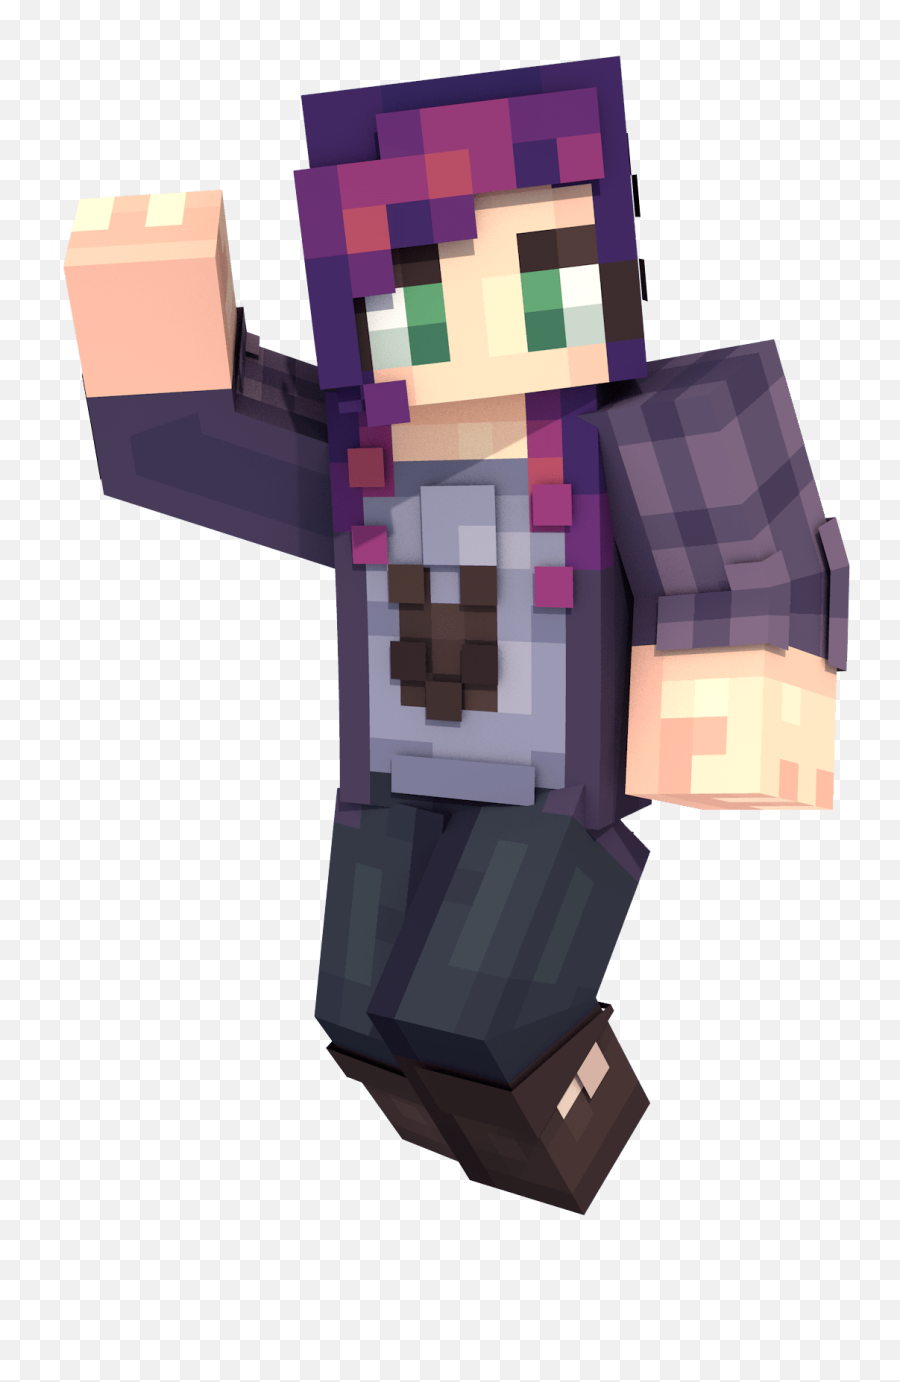 Render Your Minecraft Character In 3d - 3d Minecraft Characters Emoji,Minecraft Characters Png